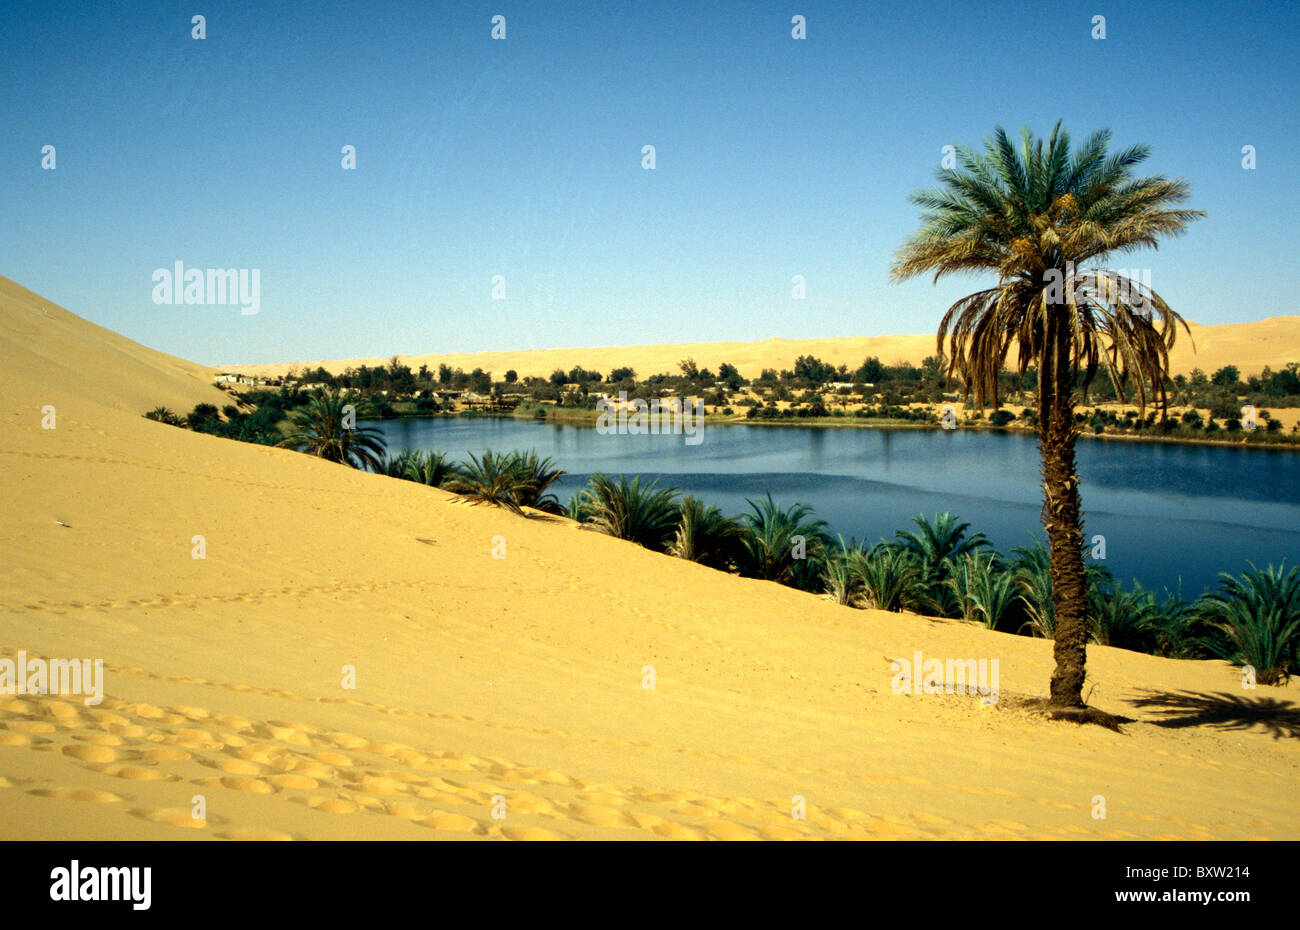 Palm Tree And Oasis In Desert Stock Photo